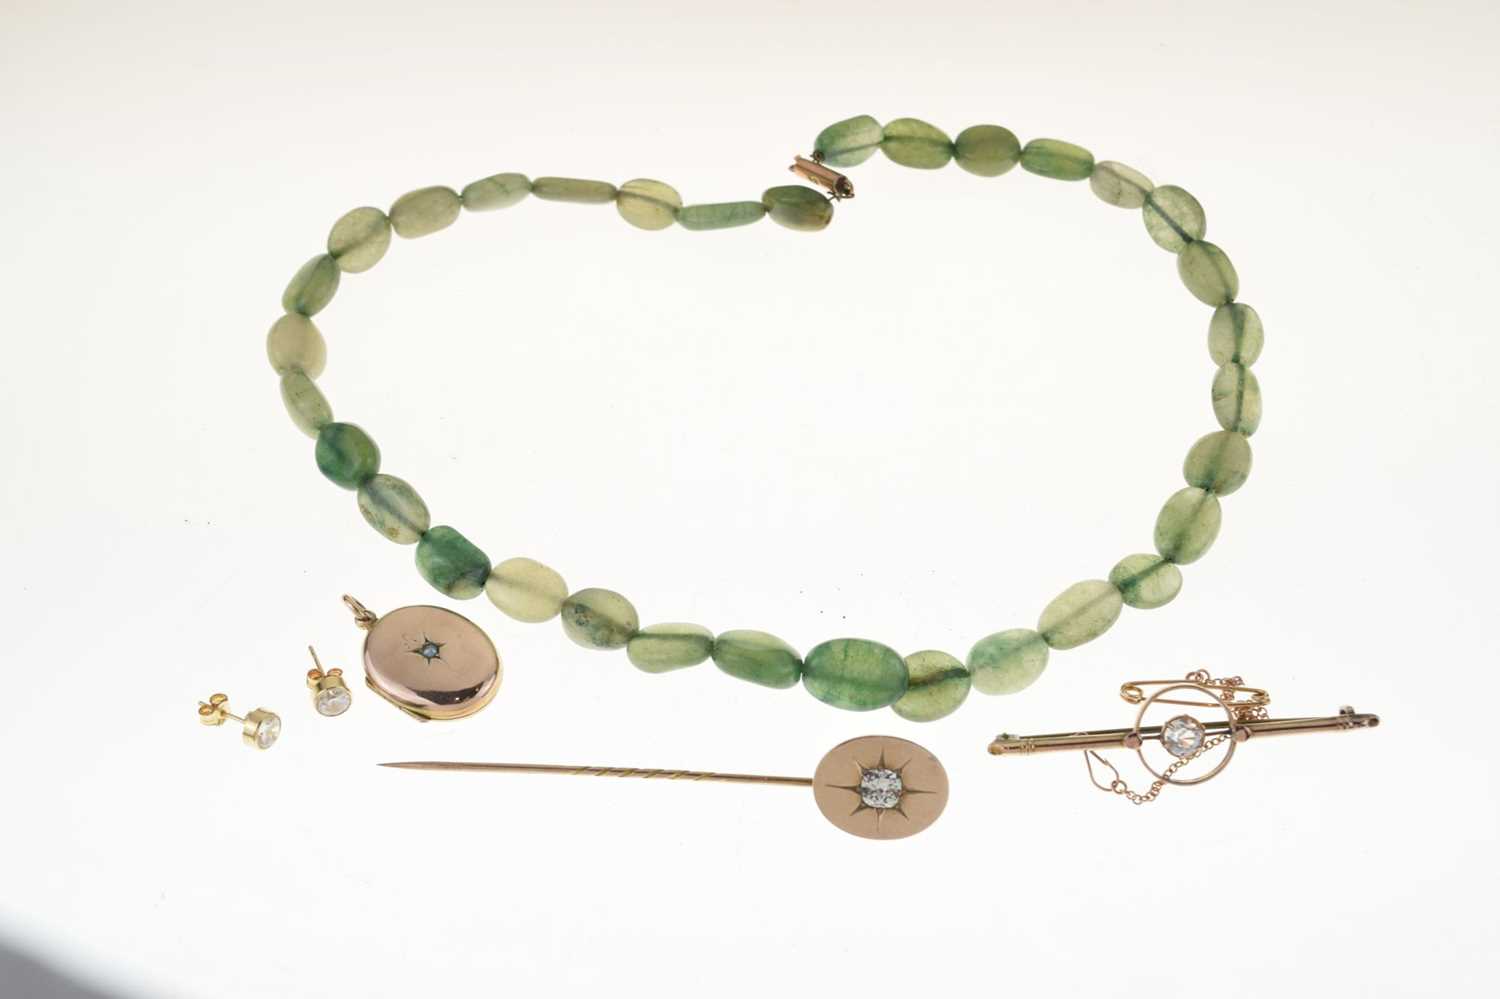 Jade bead necklace having a 9ct barrel clasp - Image 9 of 9